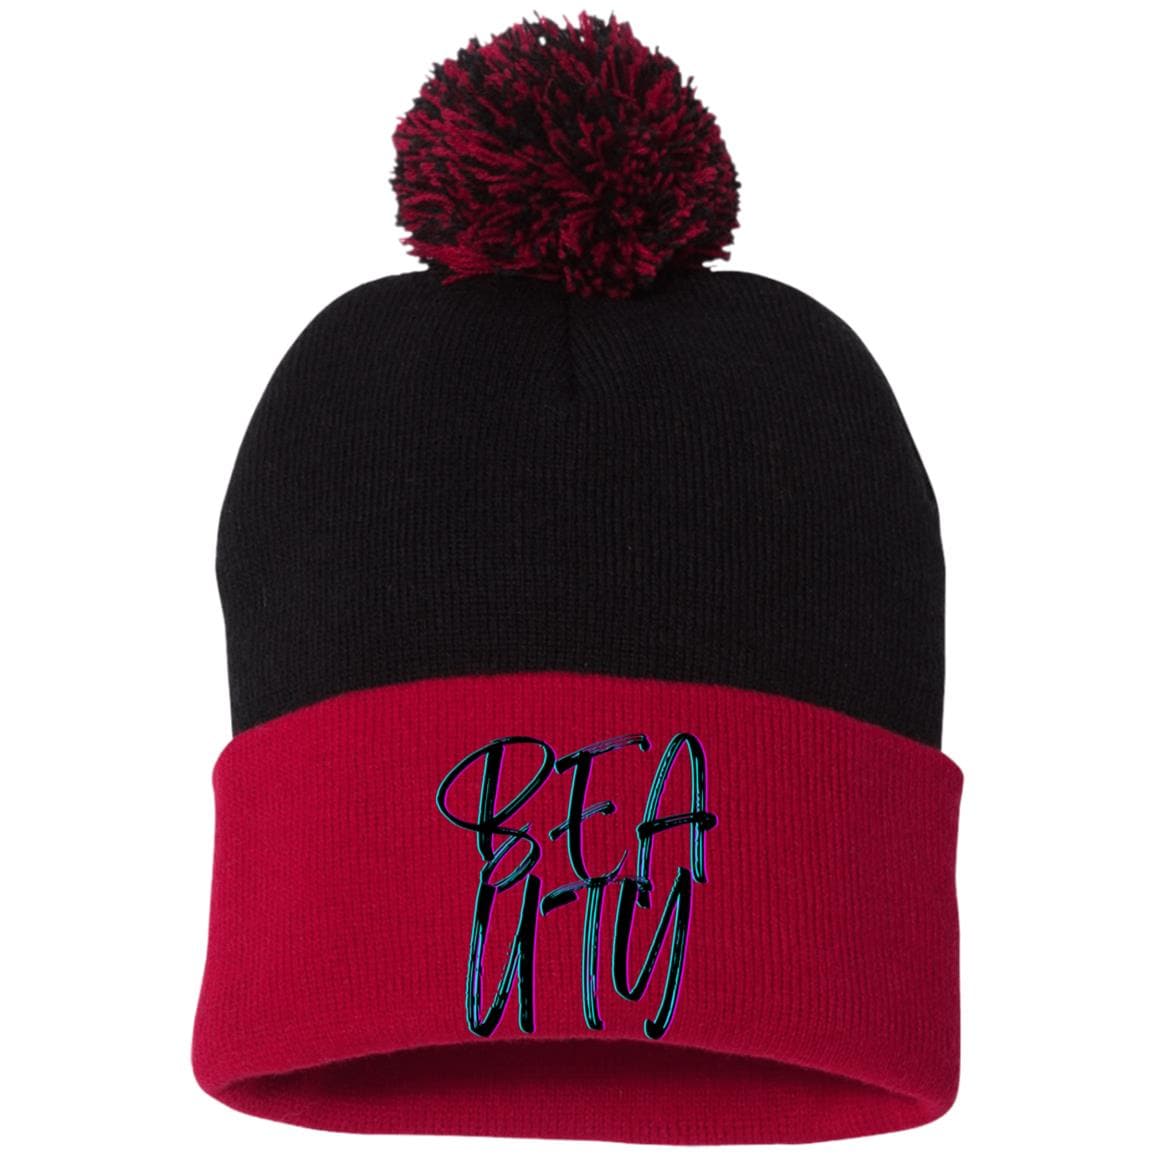 Red Black One Size - Beauty Embroidered Pom Pom Knit Cap - Hats at TFC&H Co.